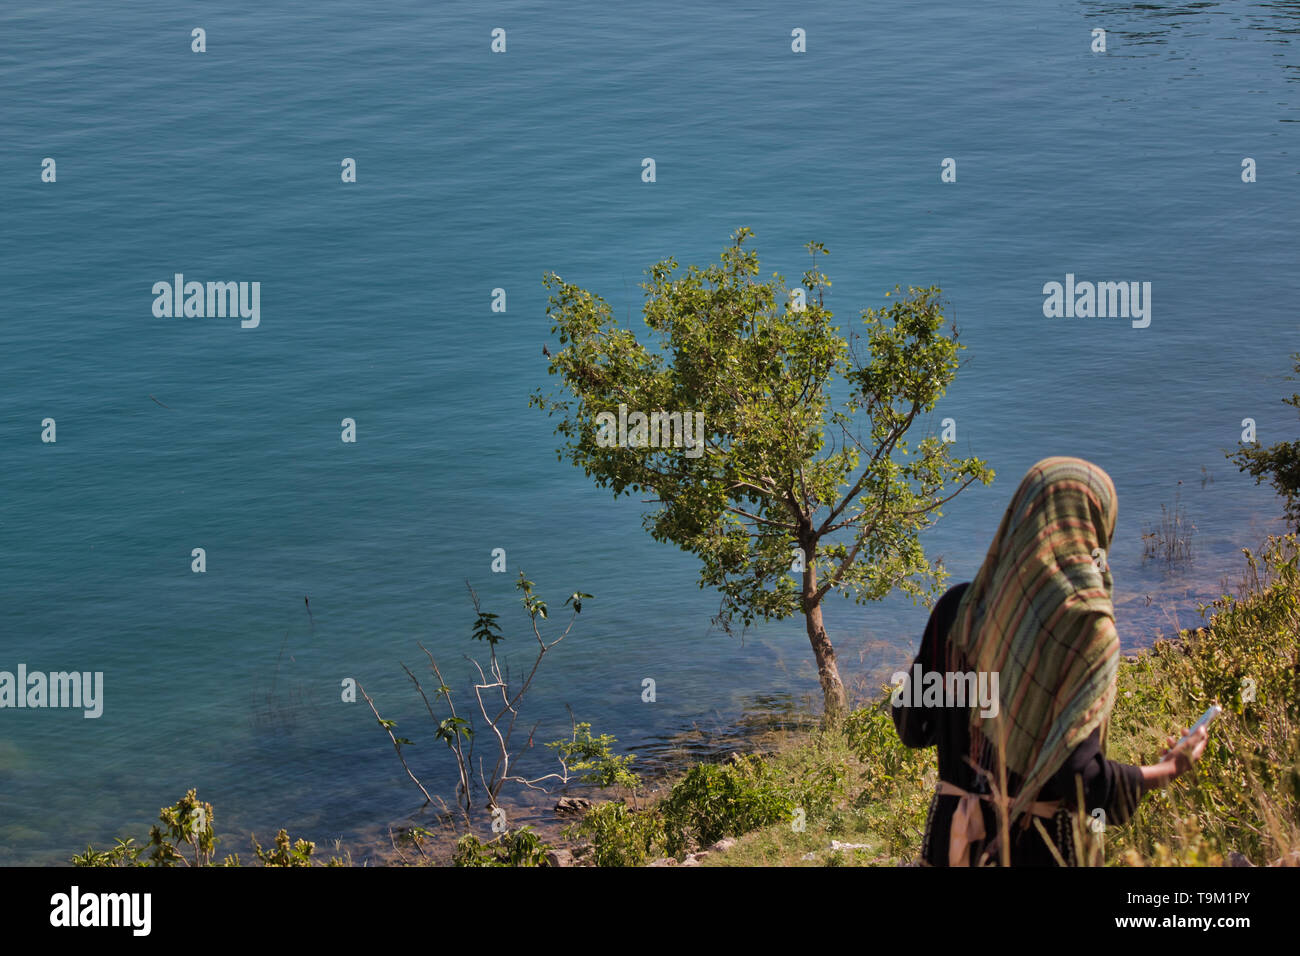 Khanpur, Pakistan - May 2019: A view of a lake next to the mountains Stock Photo